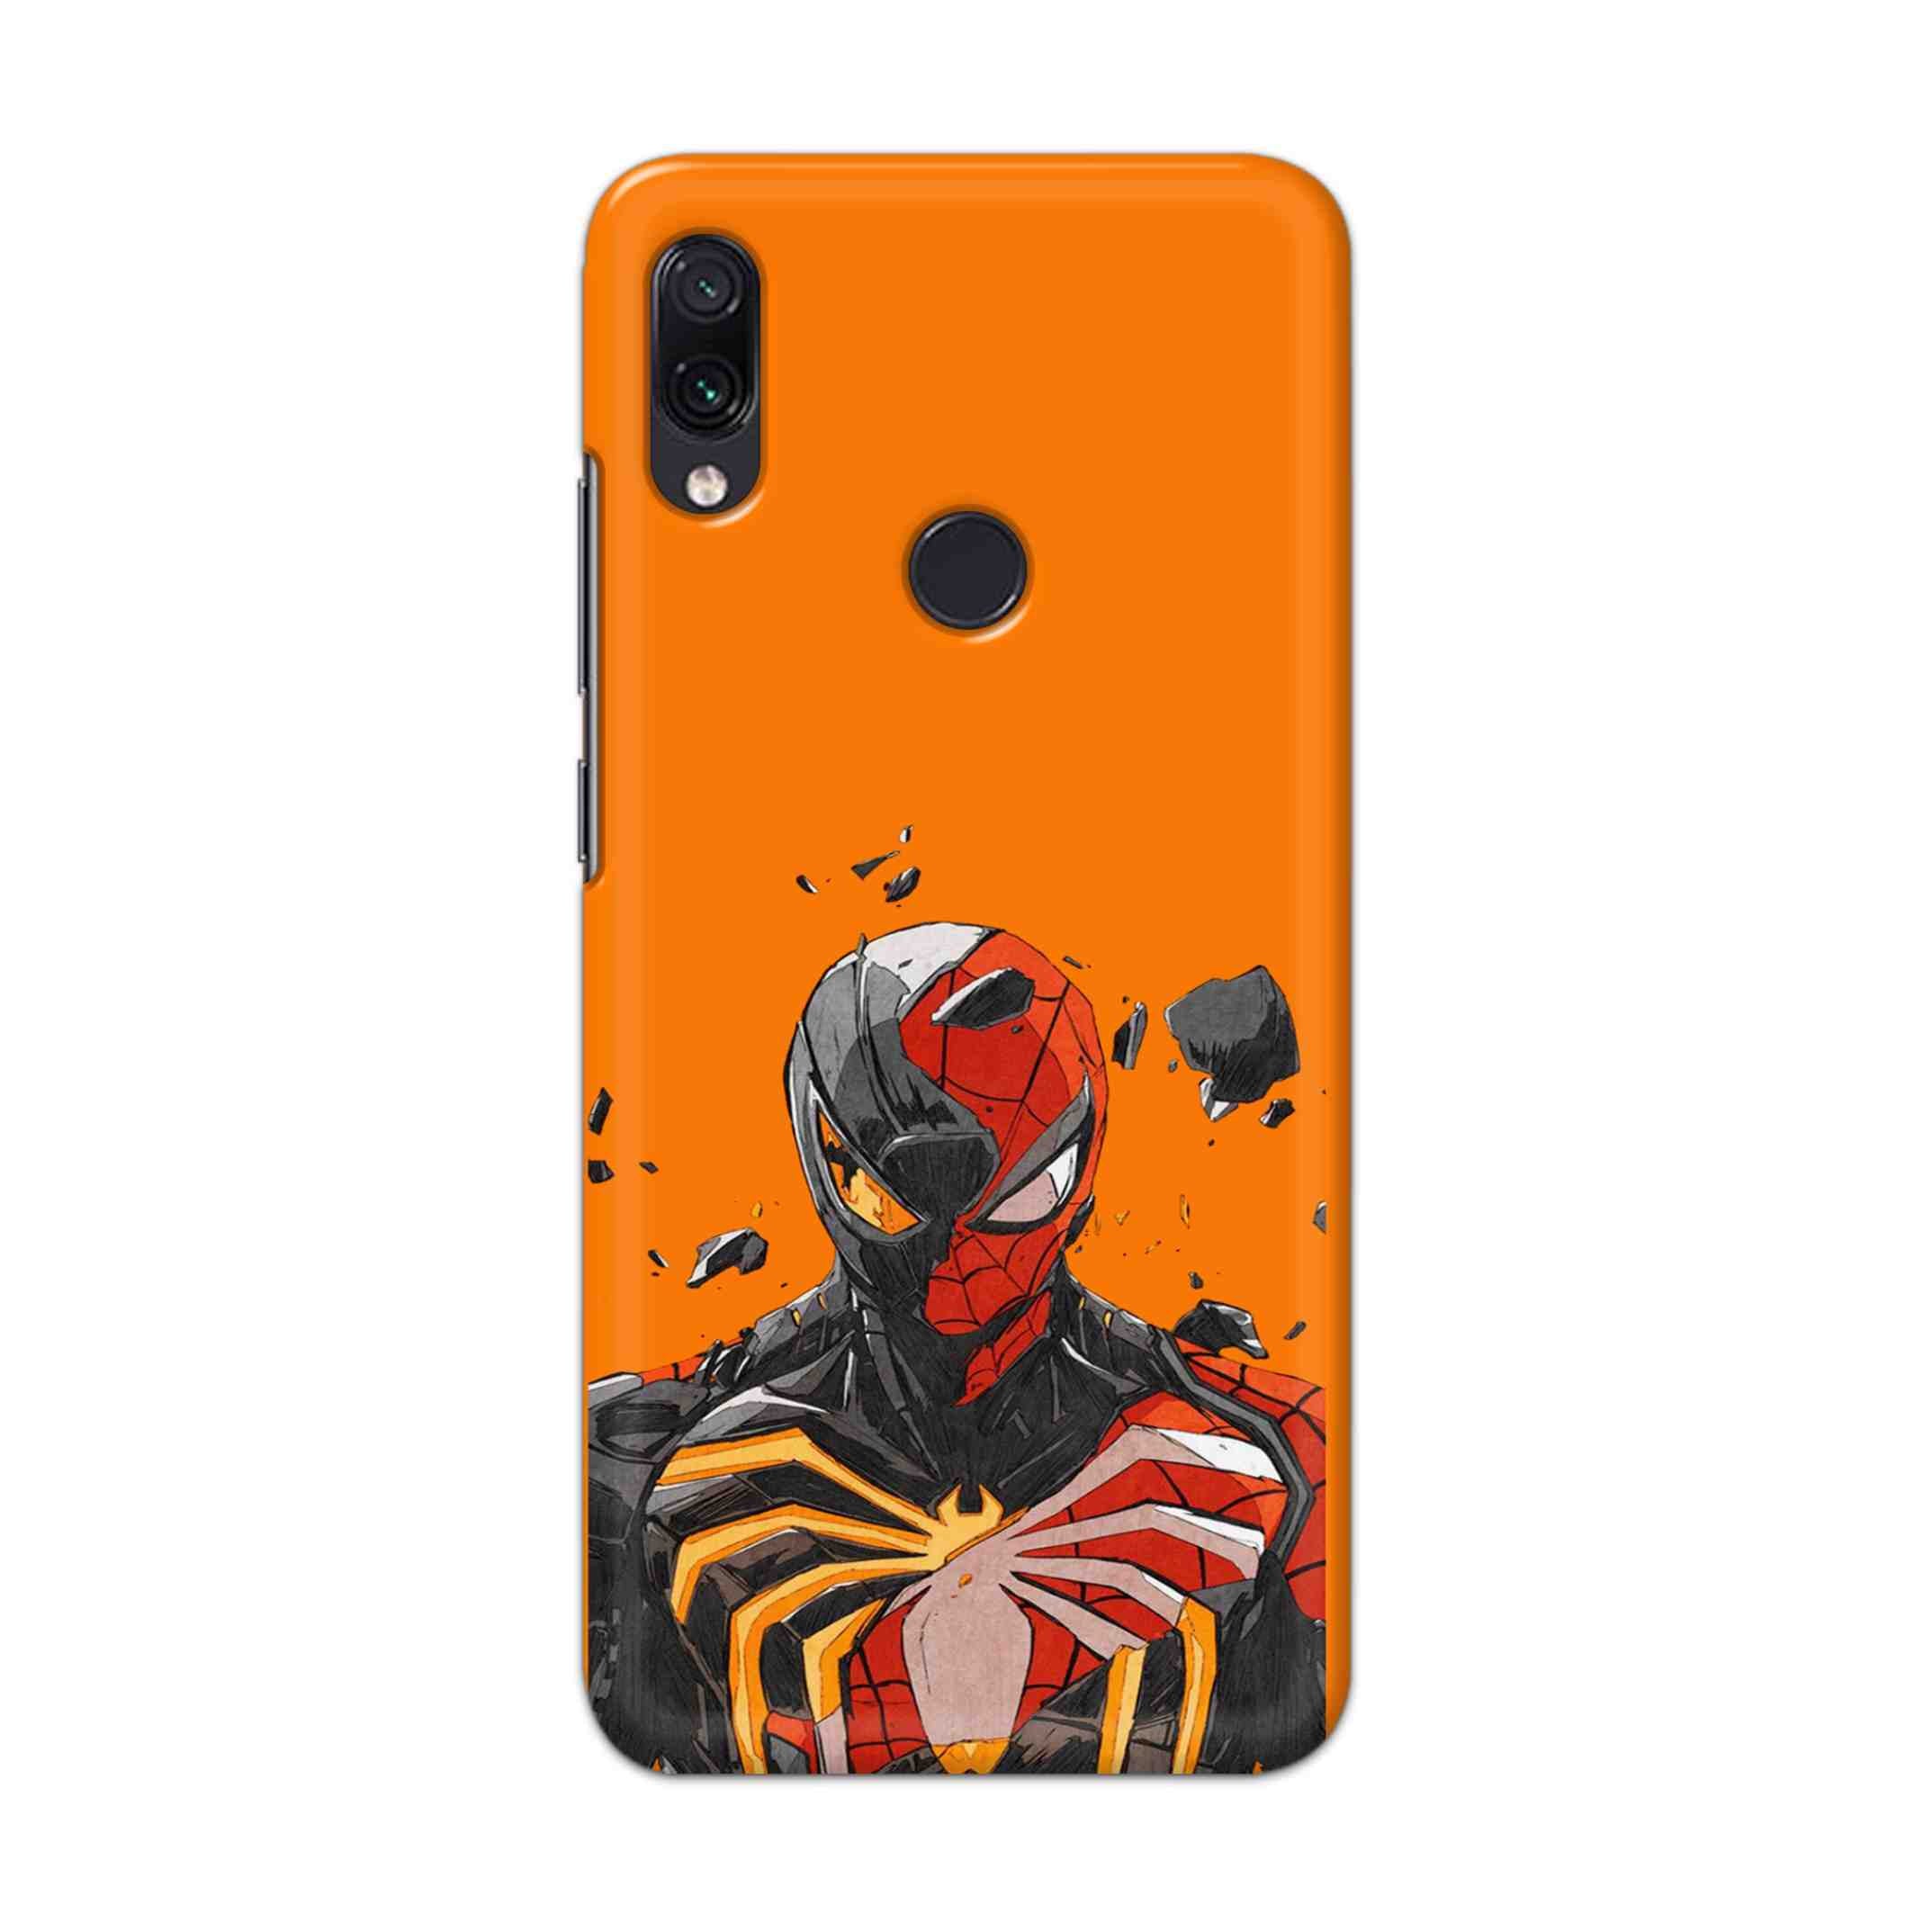 Buy Spiderman With Venom Hard Back Mobile Phone Case Cover For Redmi Note 7 / Note 7 Pro Online